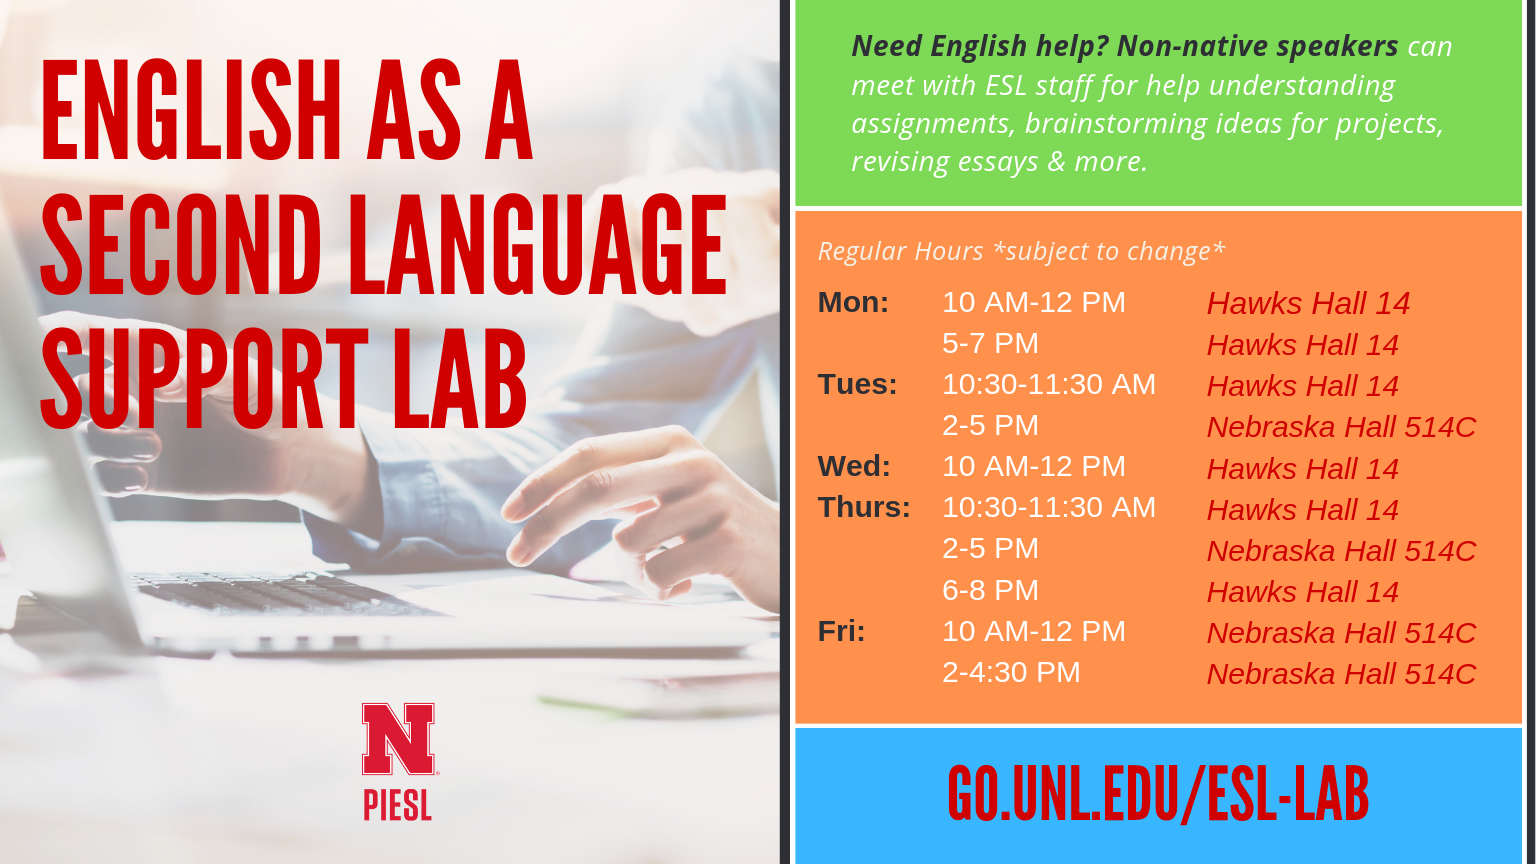 Non-native speakers can meet with ESL staff for help understanding assignments, brainstorming ideas for projects, revising essays & more.